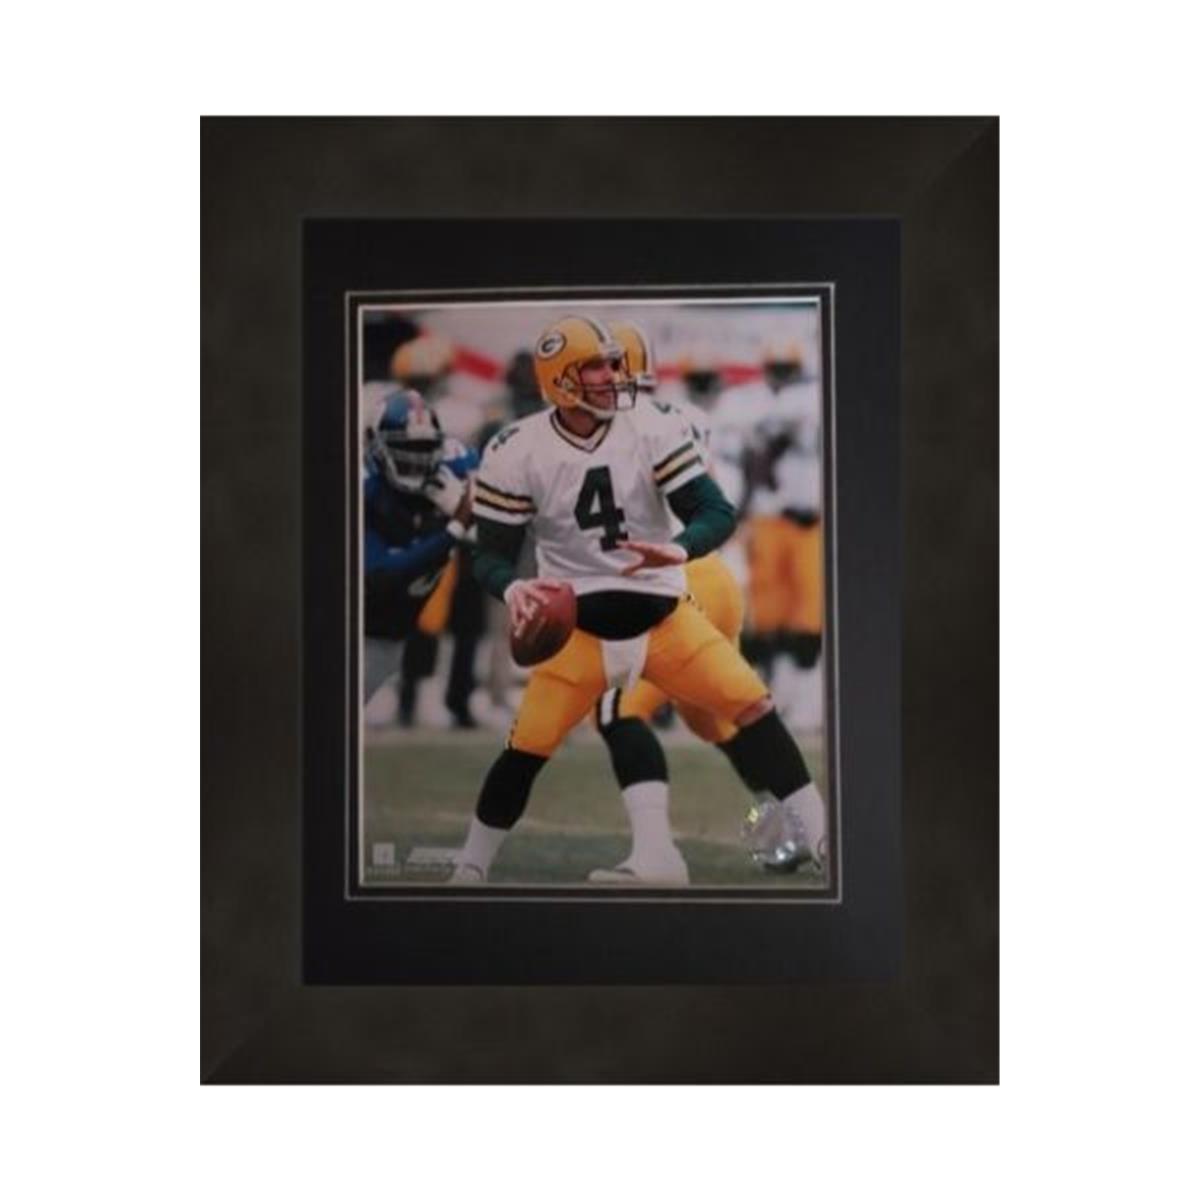 Picture of Autograph Warehouse 584109 Brett Favre 8 x 10 in. Photo - Green Bay Packers Legend - Matted & Framed